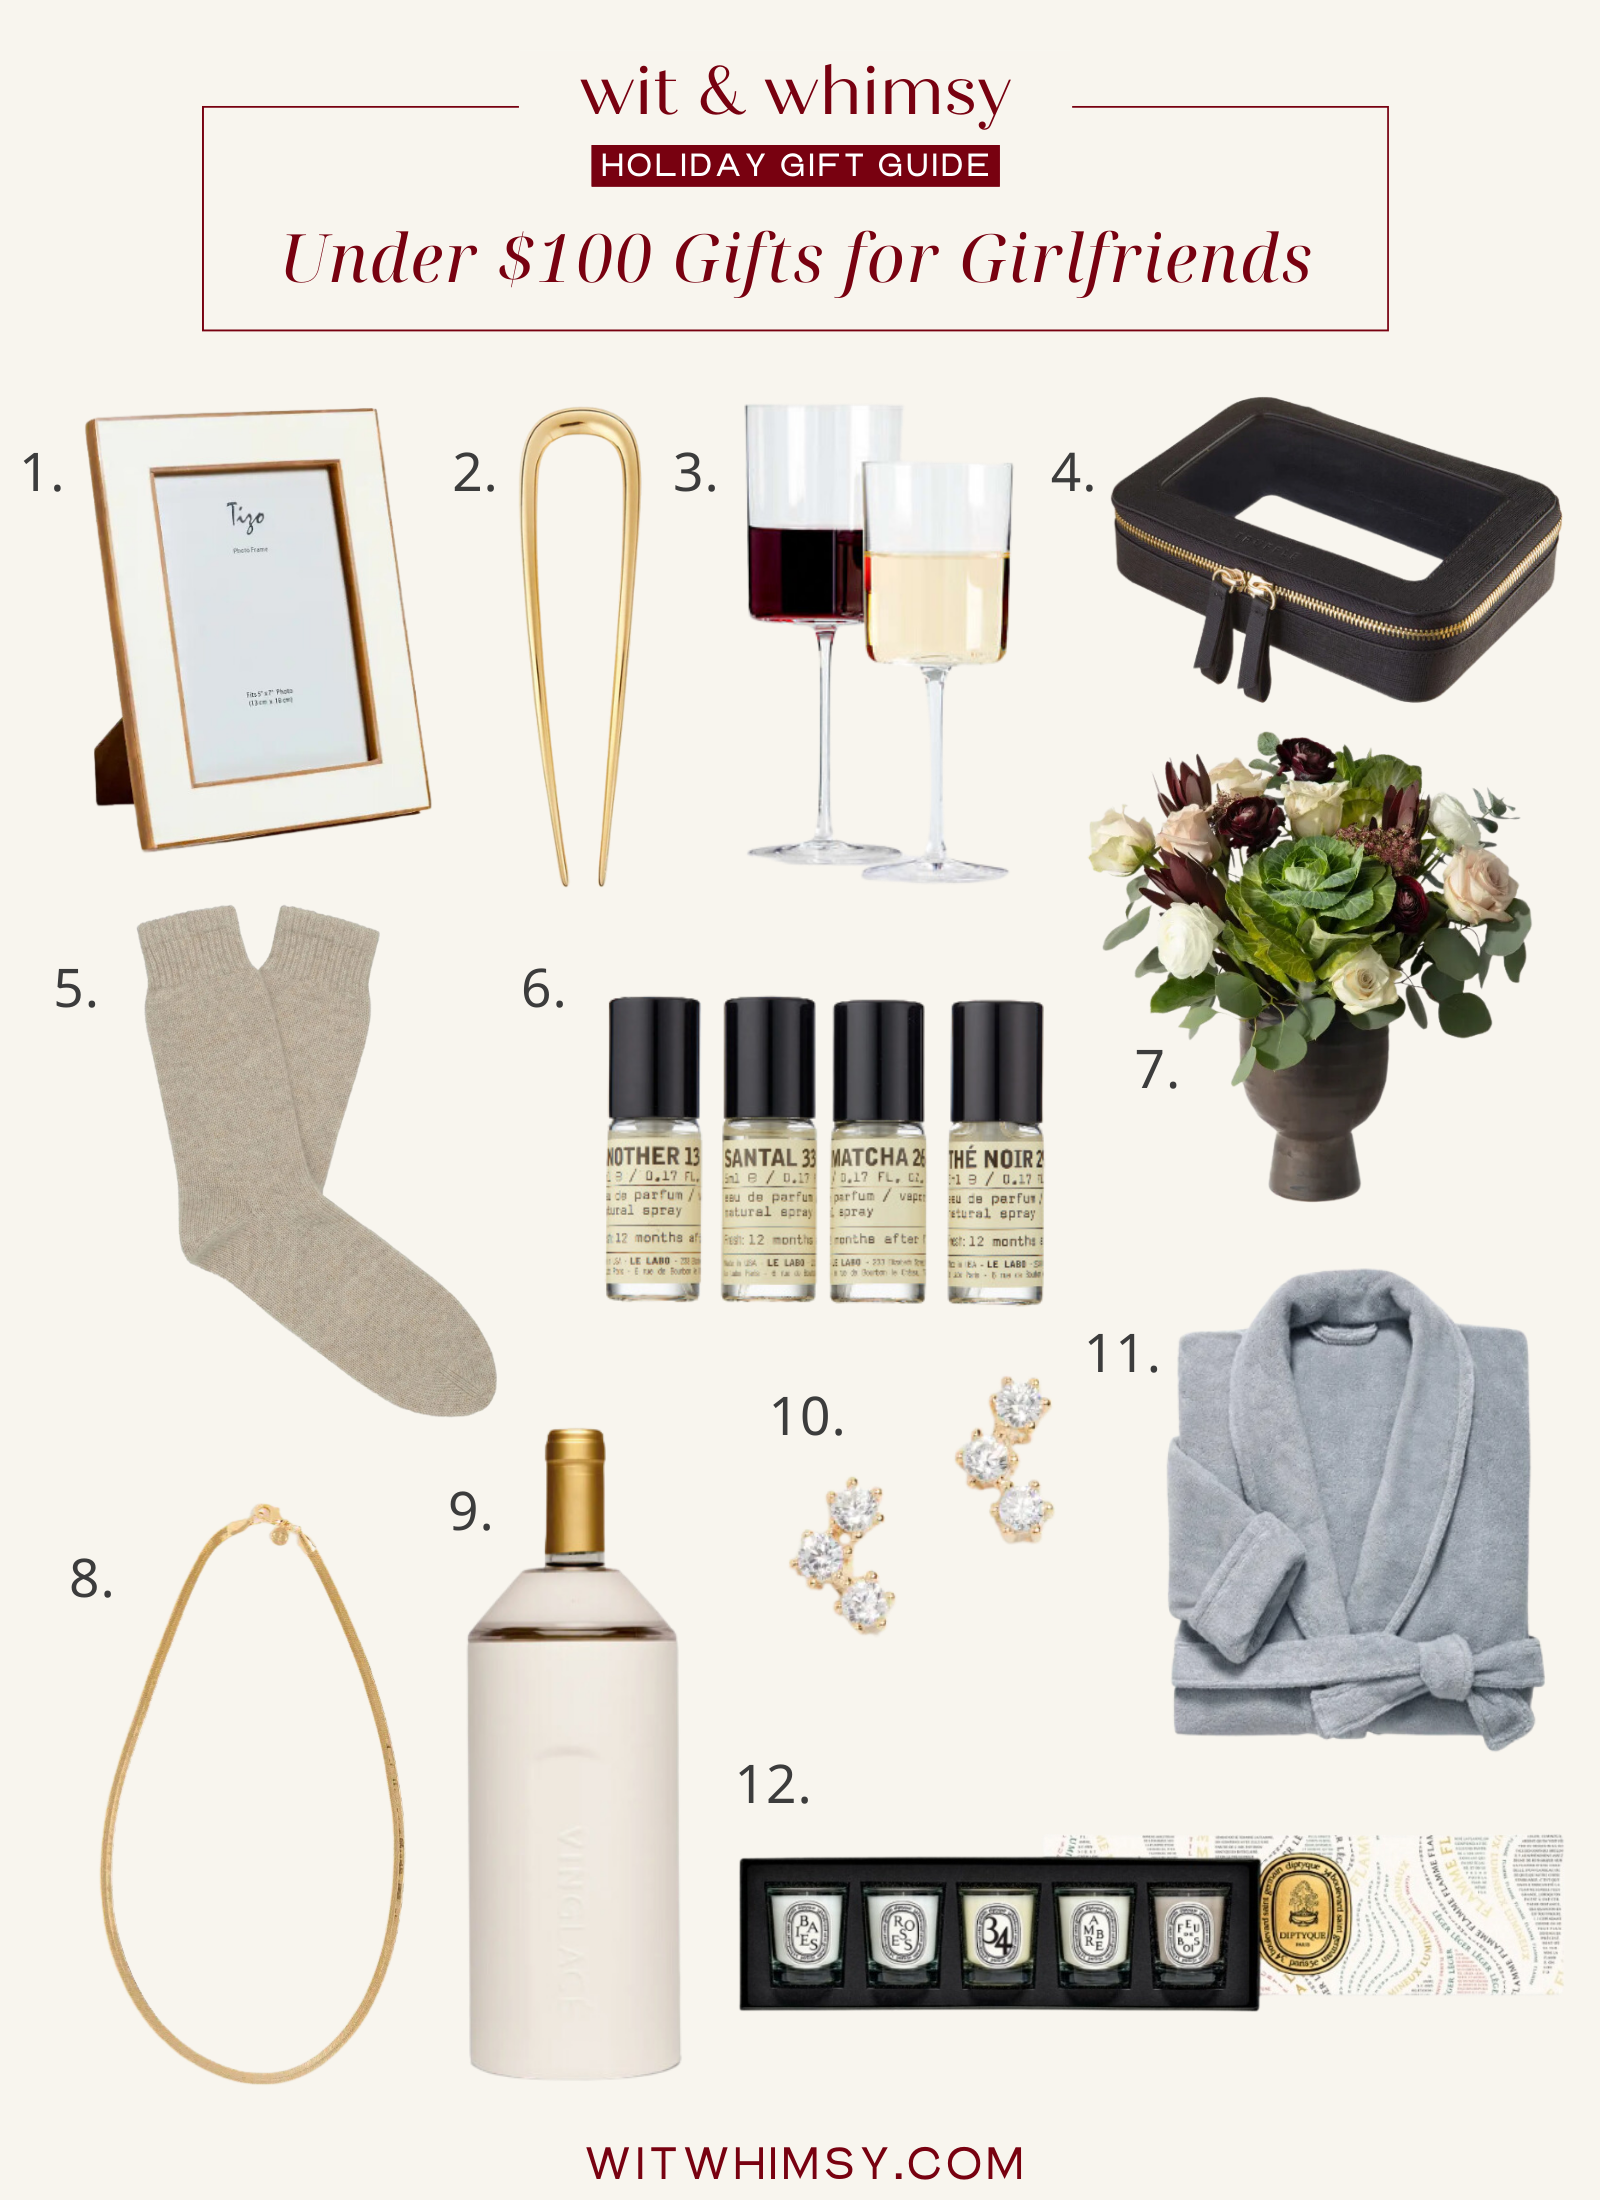 Gifts for Girlfriends under $100